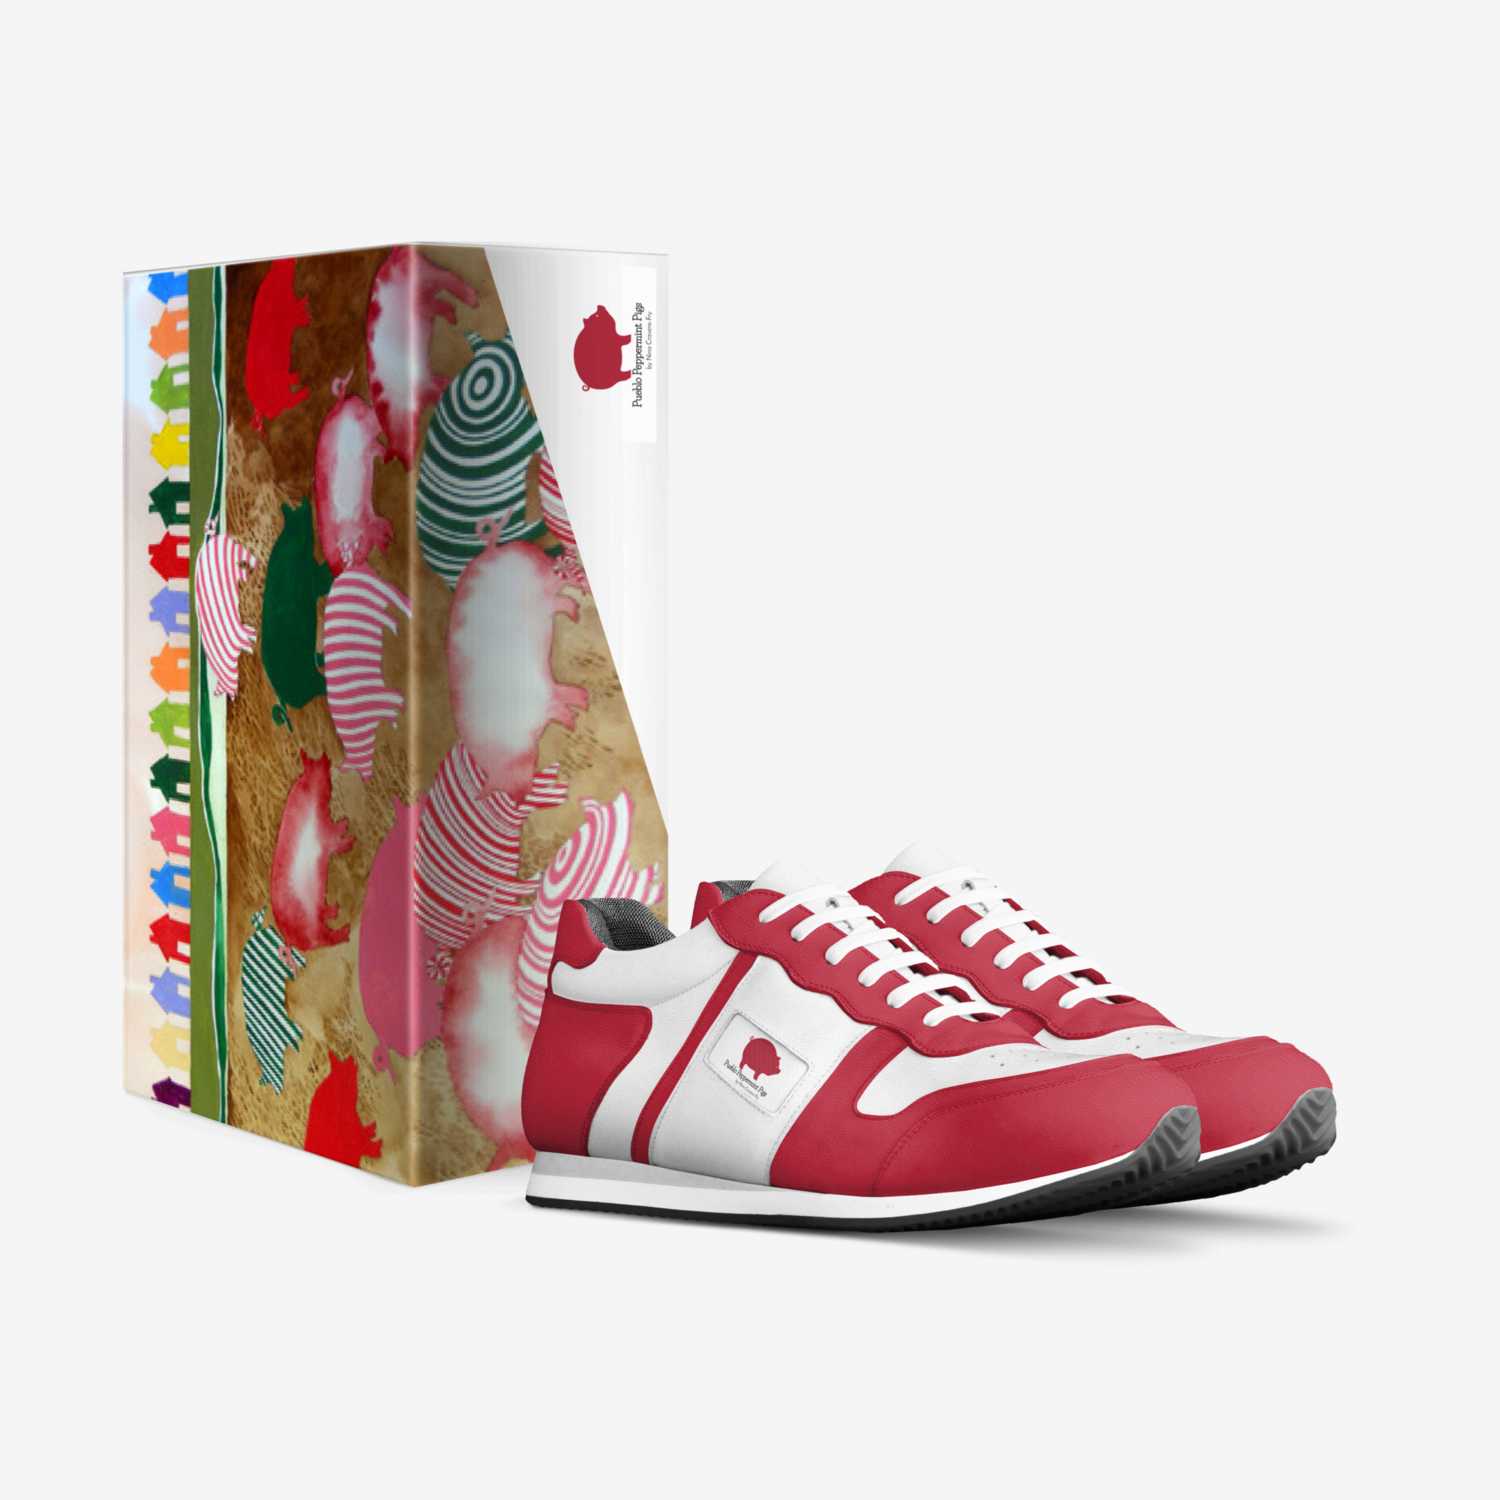 Peppermint Pigs custom made in Italy shoes by Gregory Howell | Box view